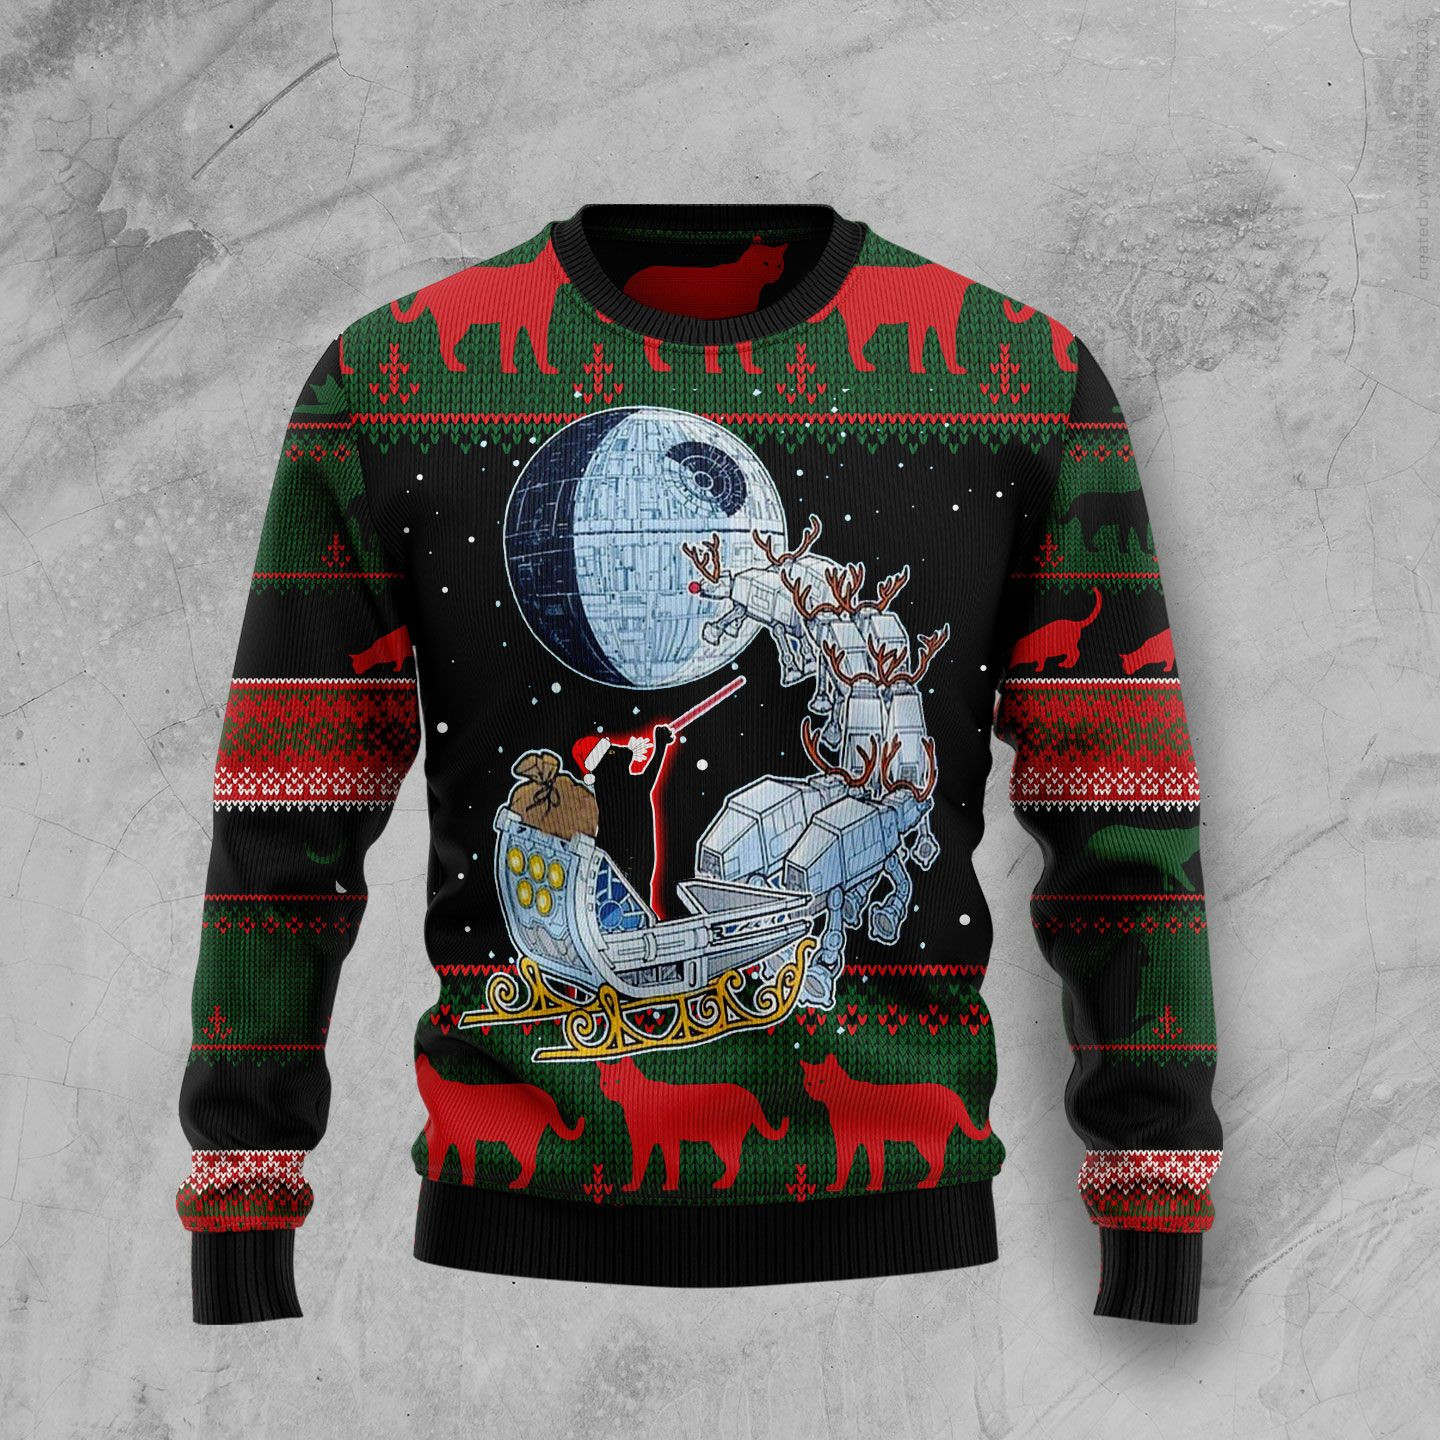 Black Cat Sleigh To Death Star Ugly Christmas Sweater Ugly Sweater For Men Women